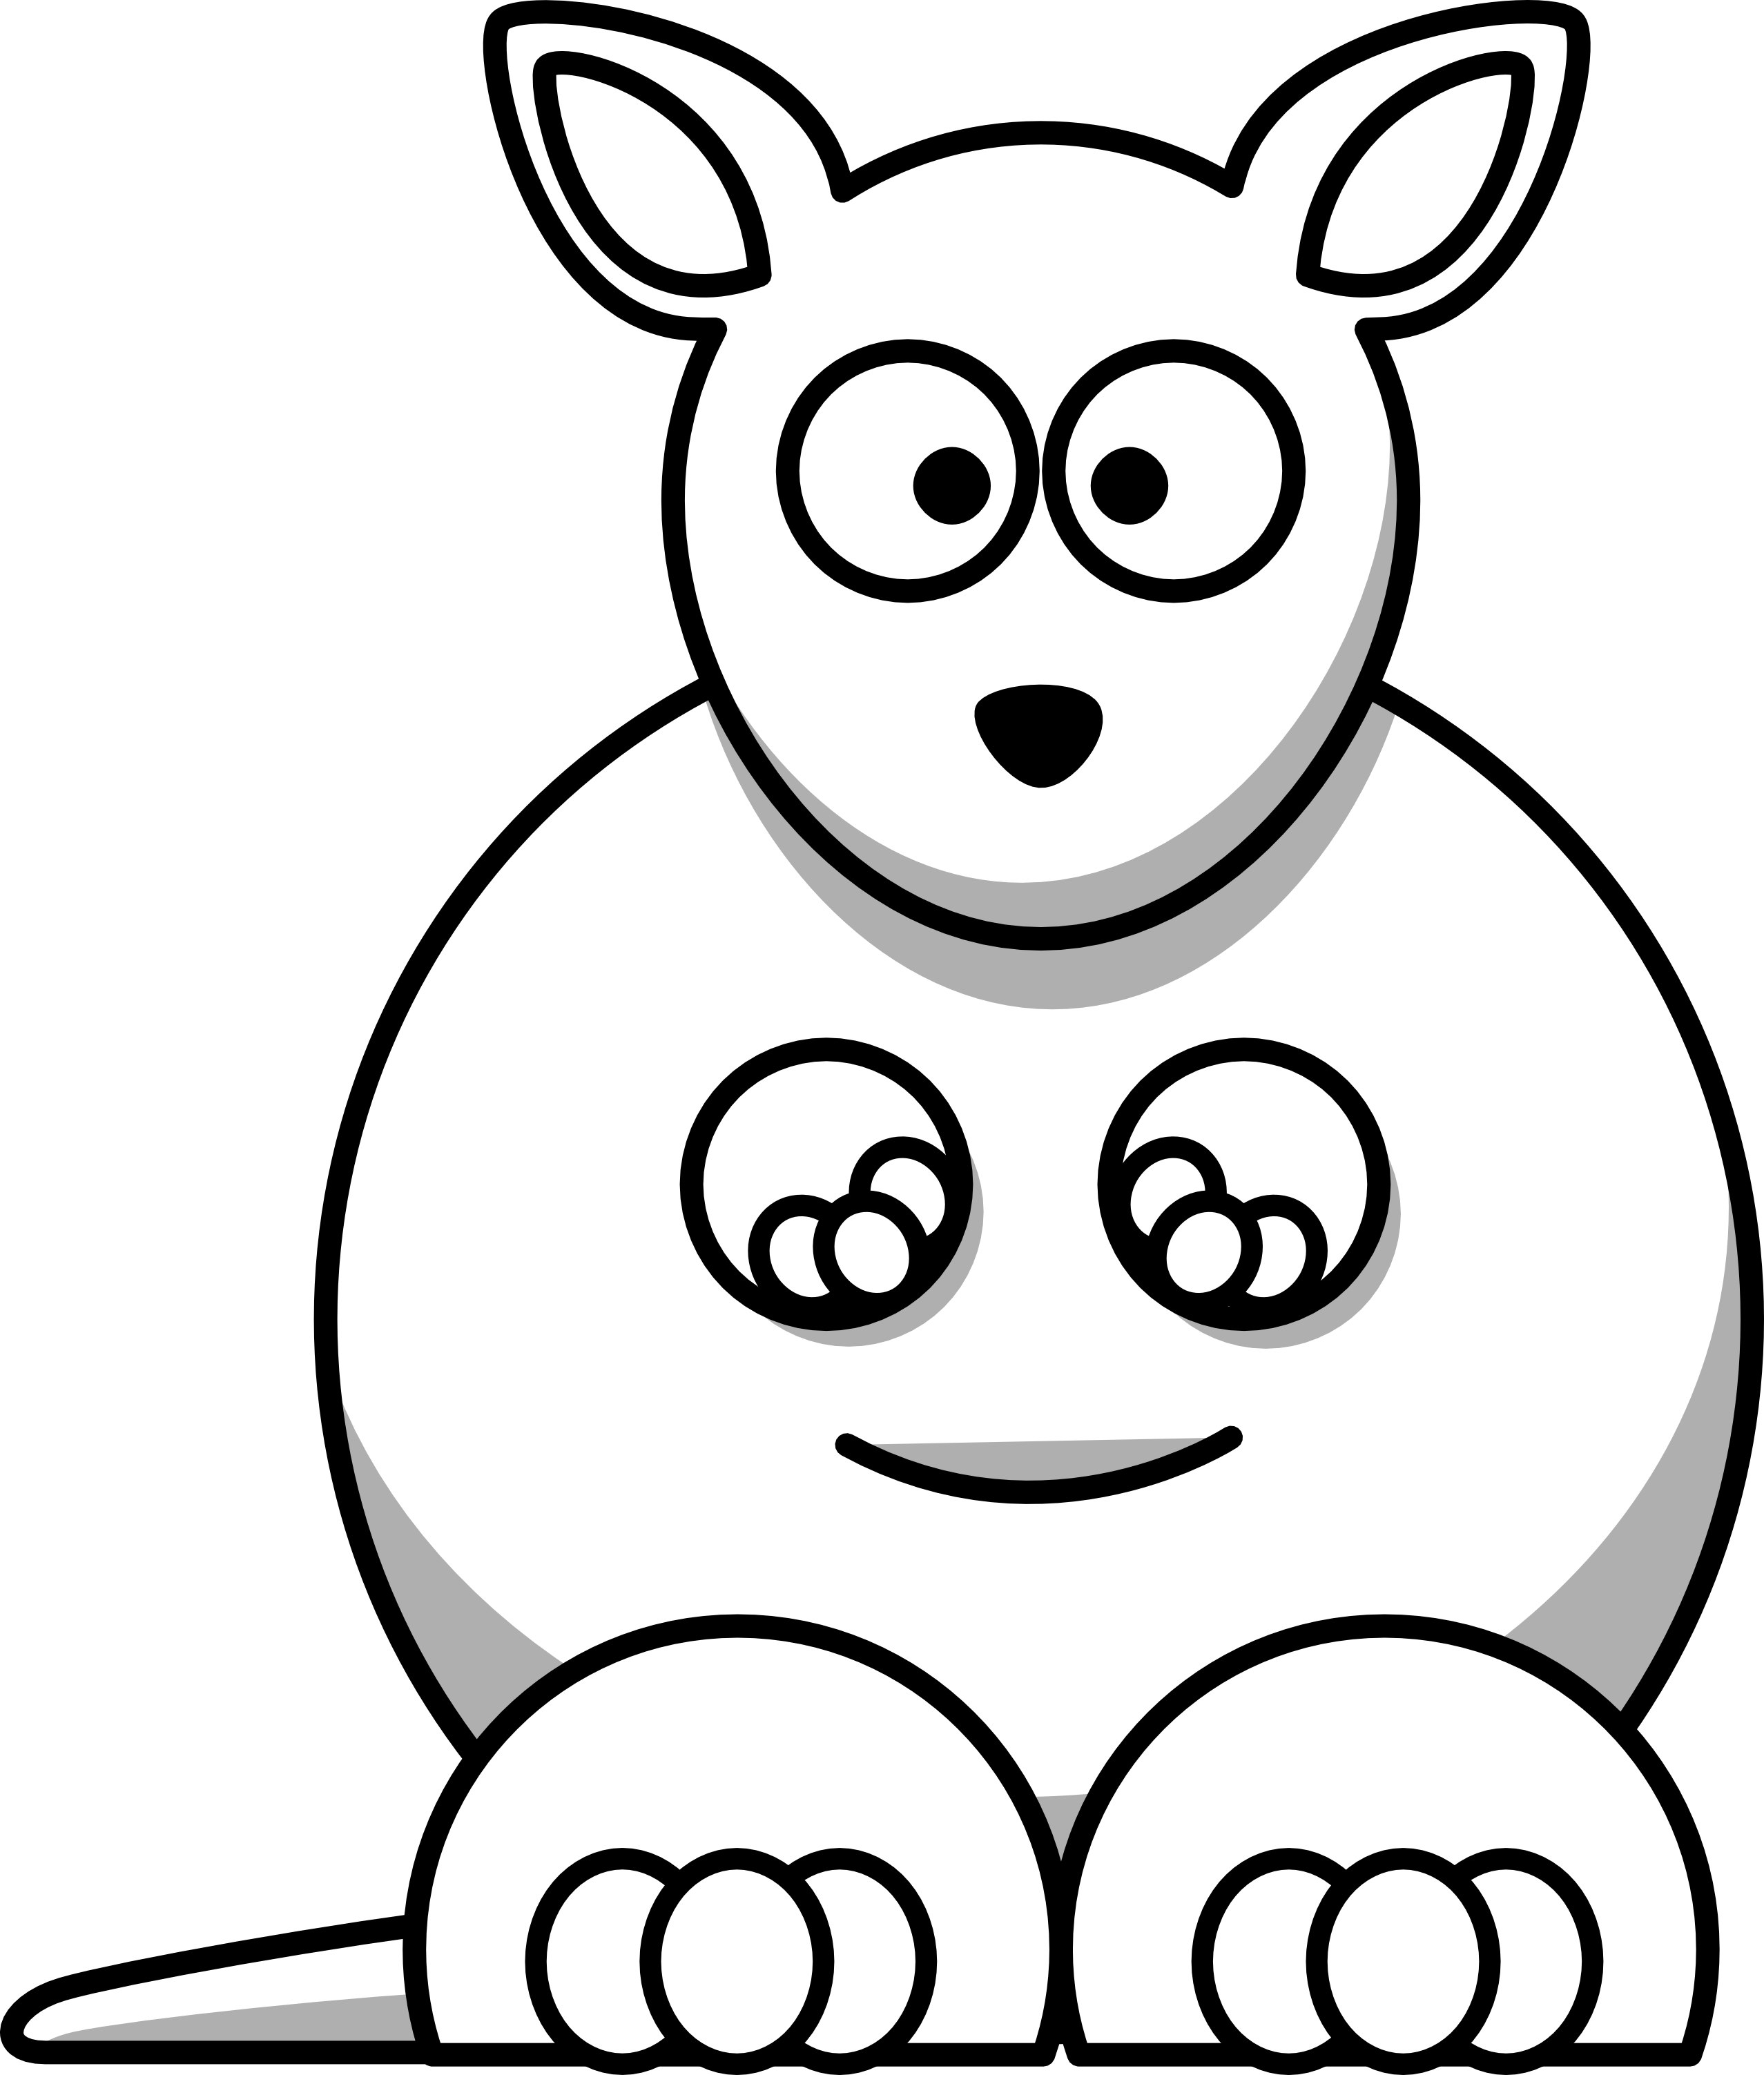 Free Black And White Drawings Of Animals Download Free Clip Art Free Clip Art On Clipart Library